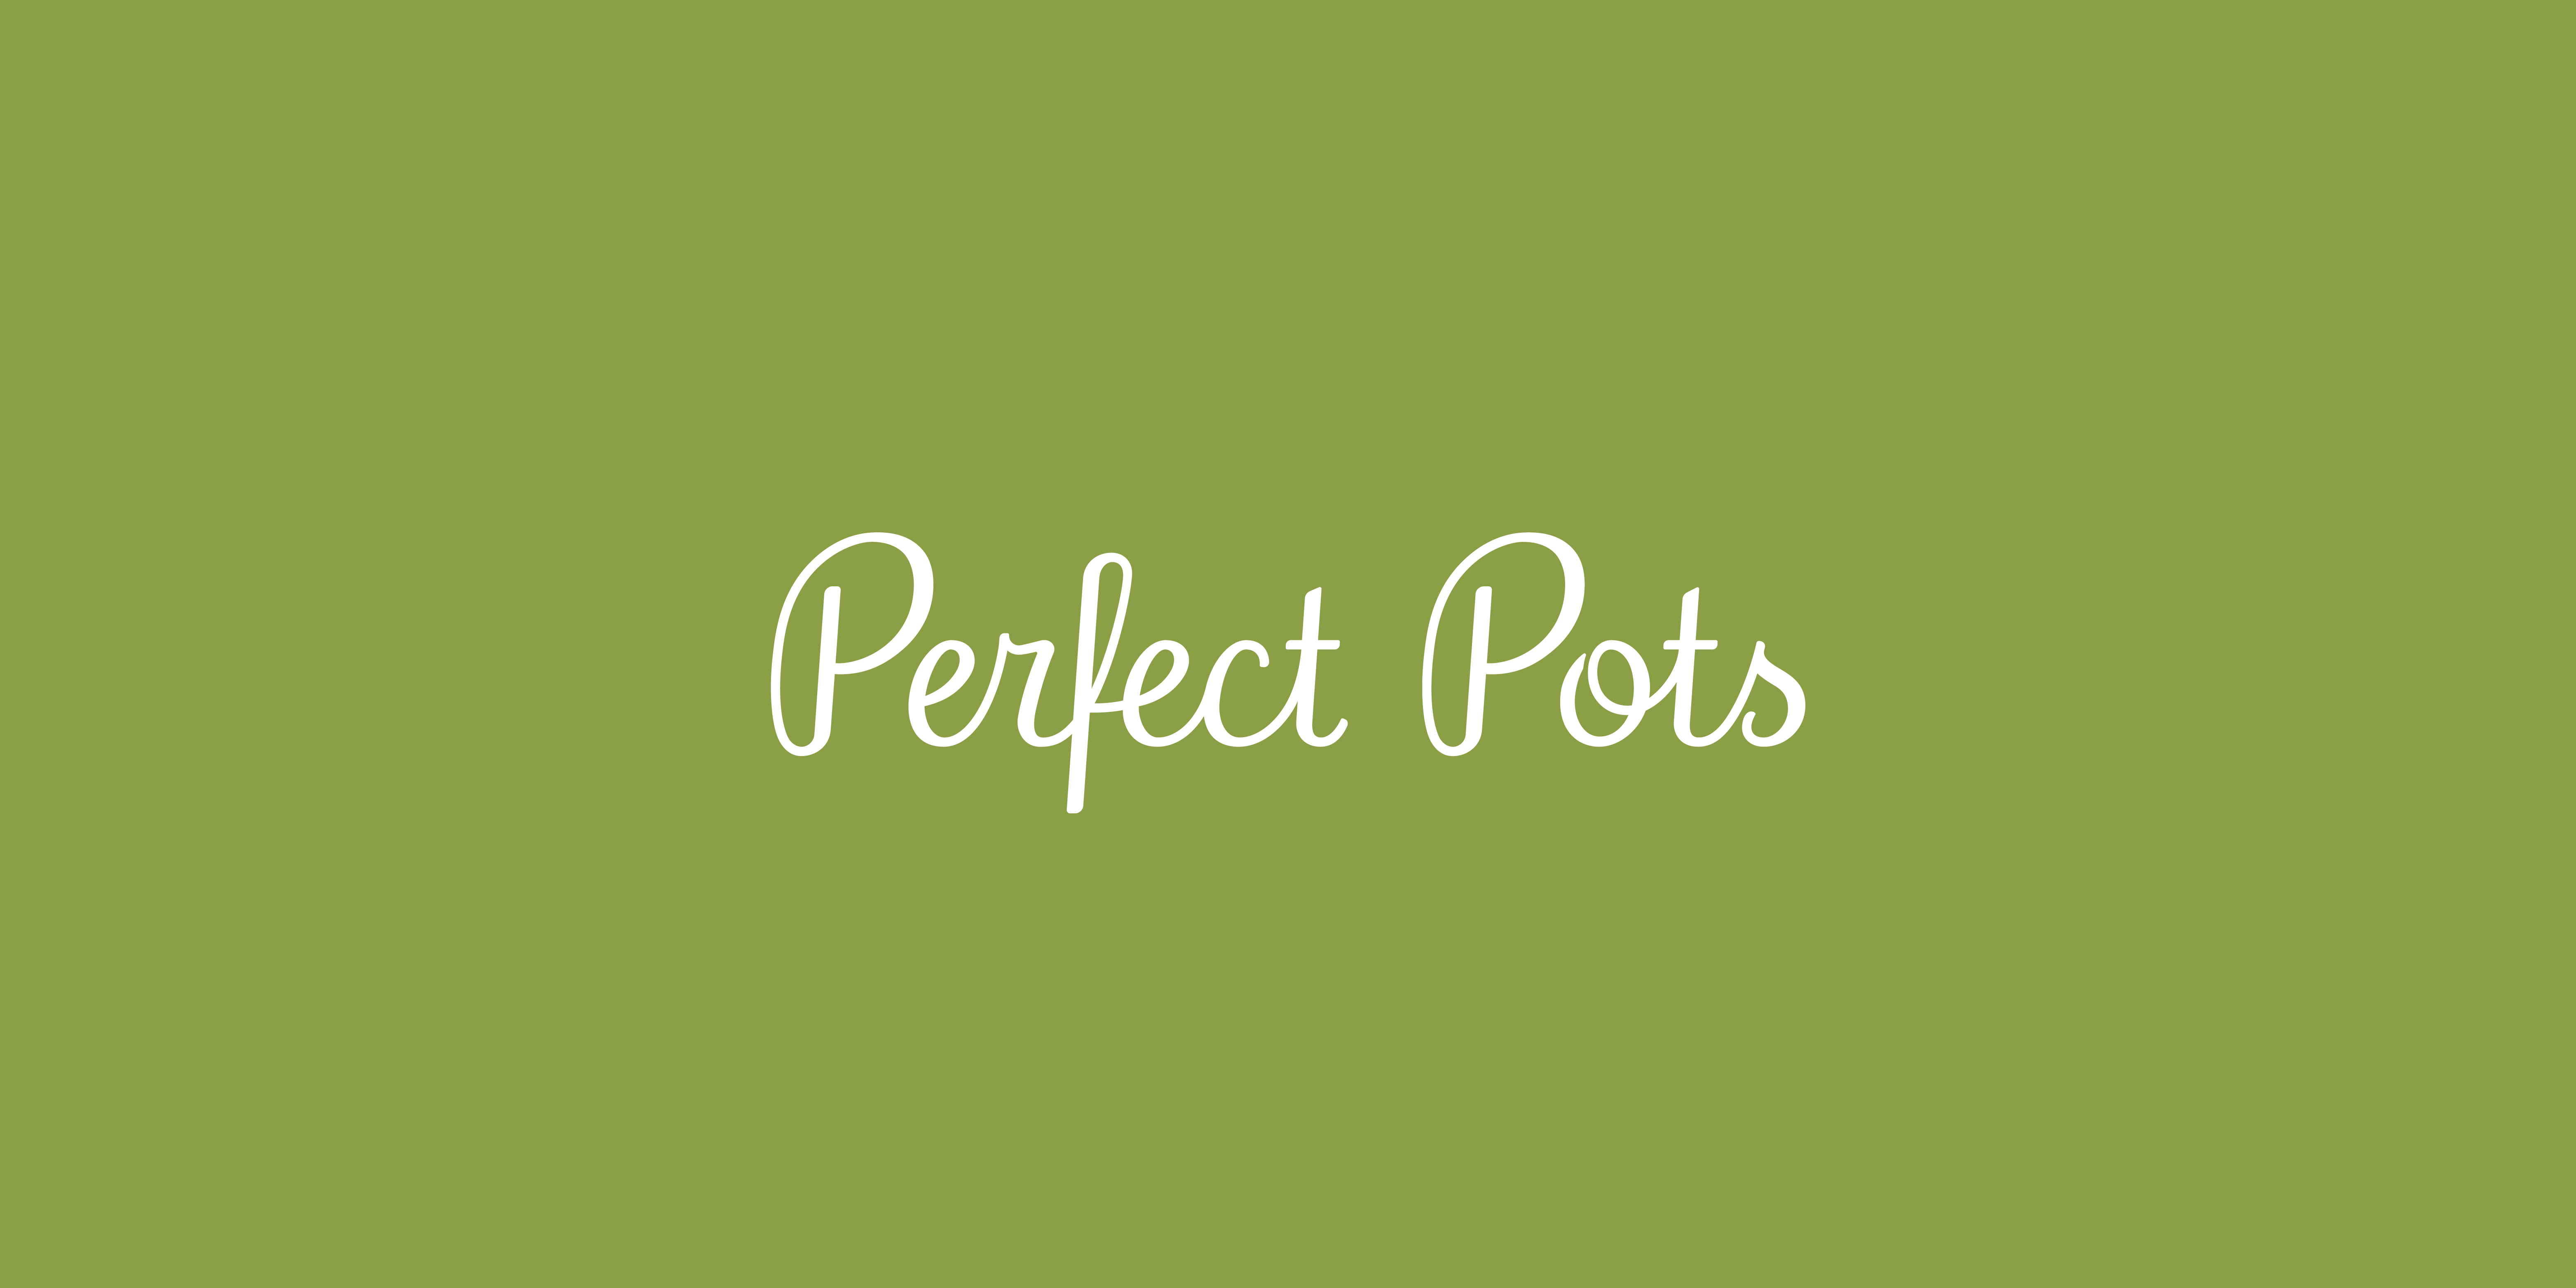 /assets/images/perfectpots/g3_website_project_perfectpots-logo.jpg